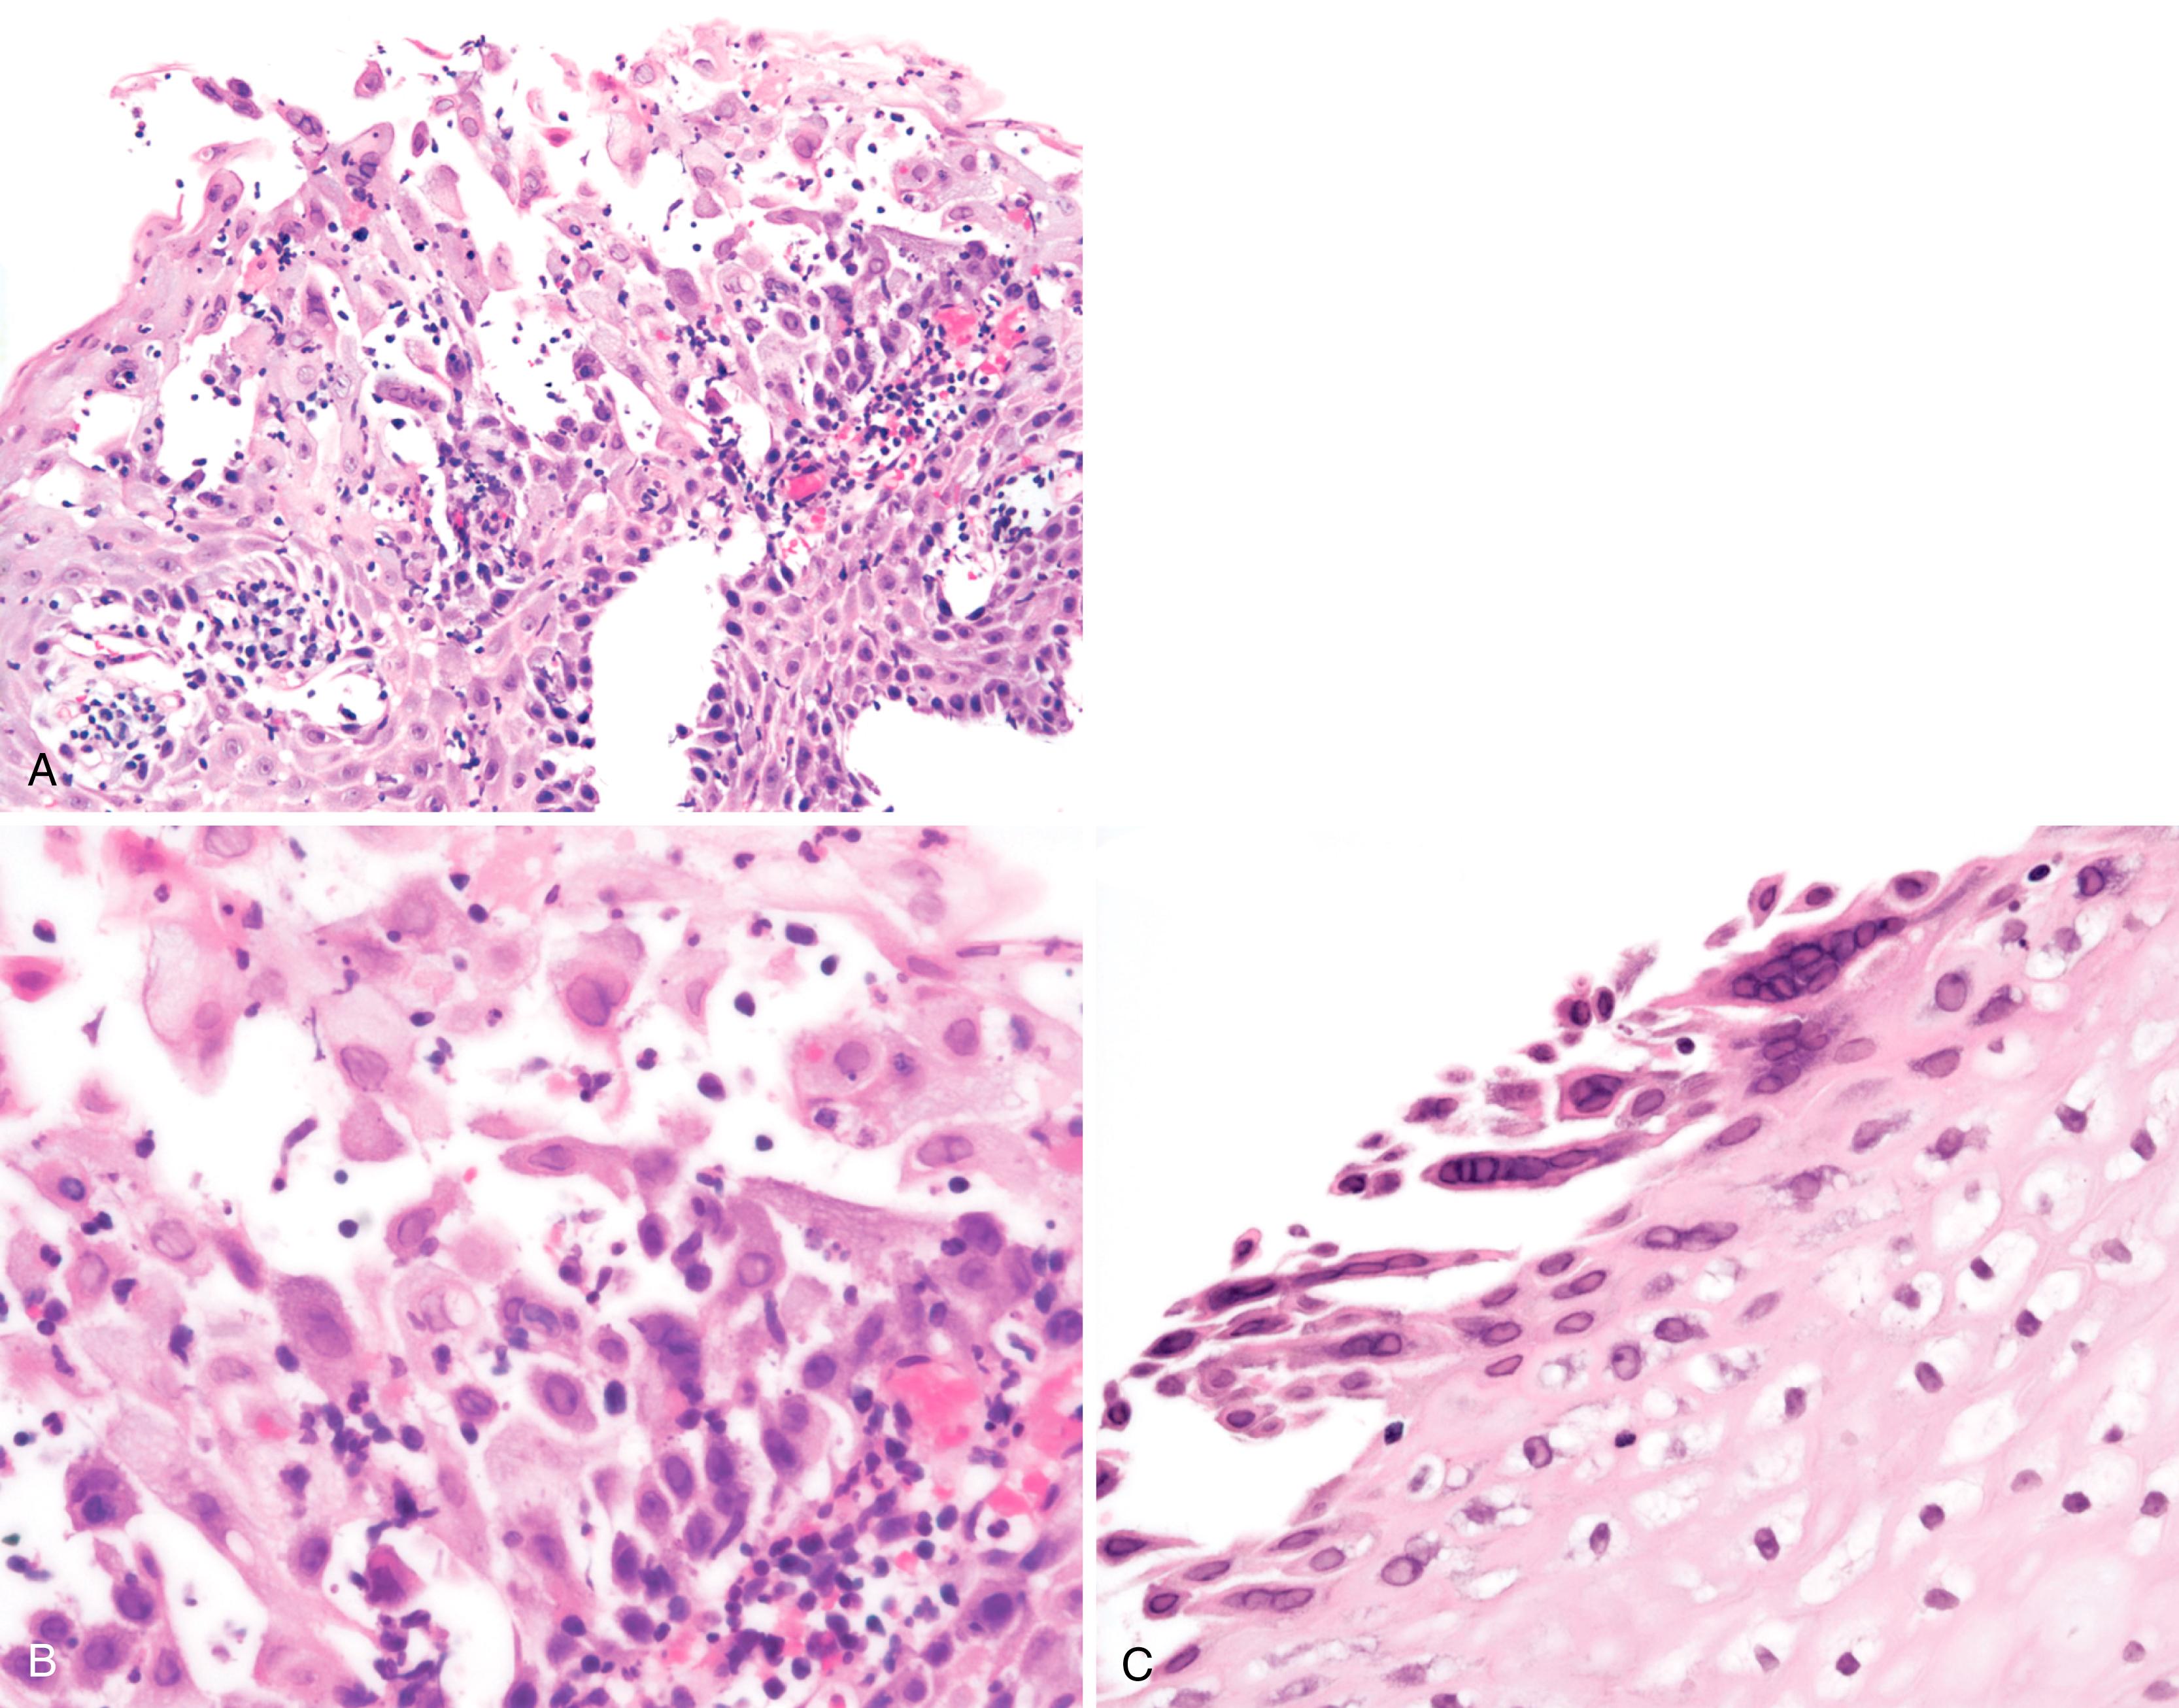 FIGURE 4.6, A, Esophageal biopsy shows dyshesion and sloughing of squamous epithelial cells, intraepithelial neutrophils, and herpetic inclusions within squamous cells. B, Higher-power view shows the homogeneous basophilic “ground-glass” inclusions of herpes simplex virus with peripherally marginated chromatin. C, Multiple inclusions may be present within a single cell, known as a polykaryon.